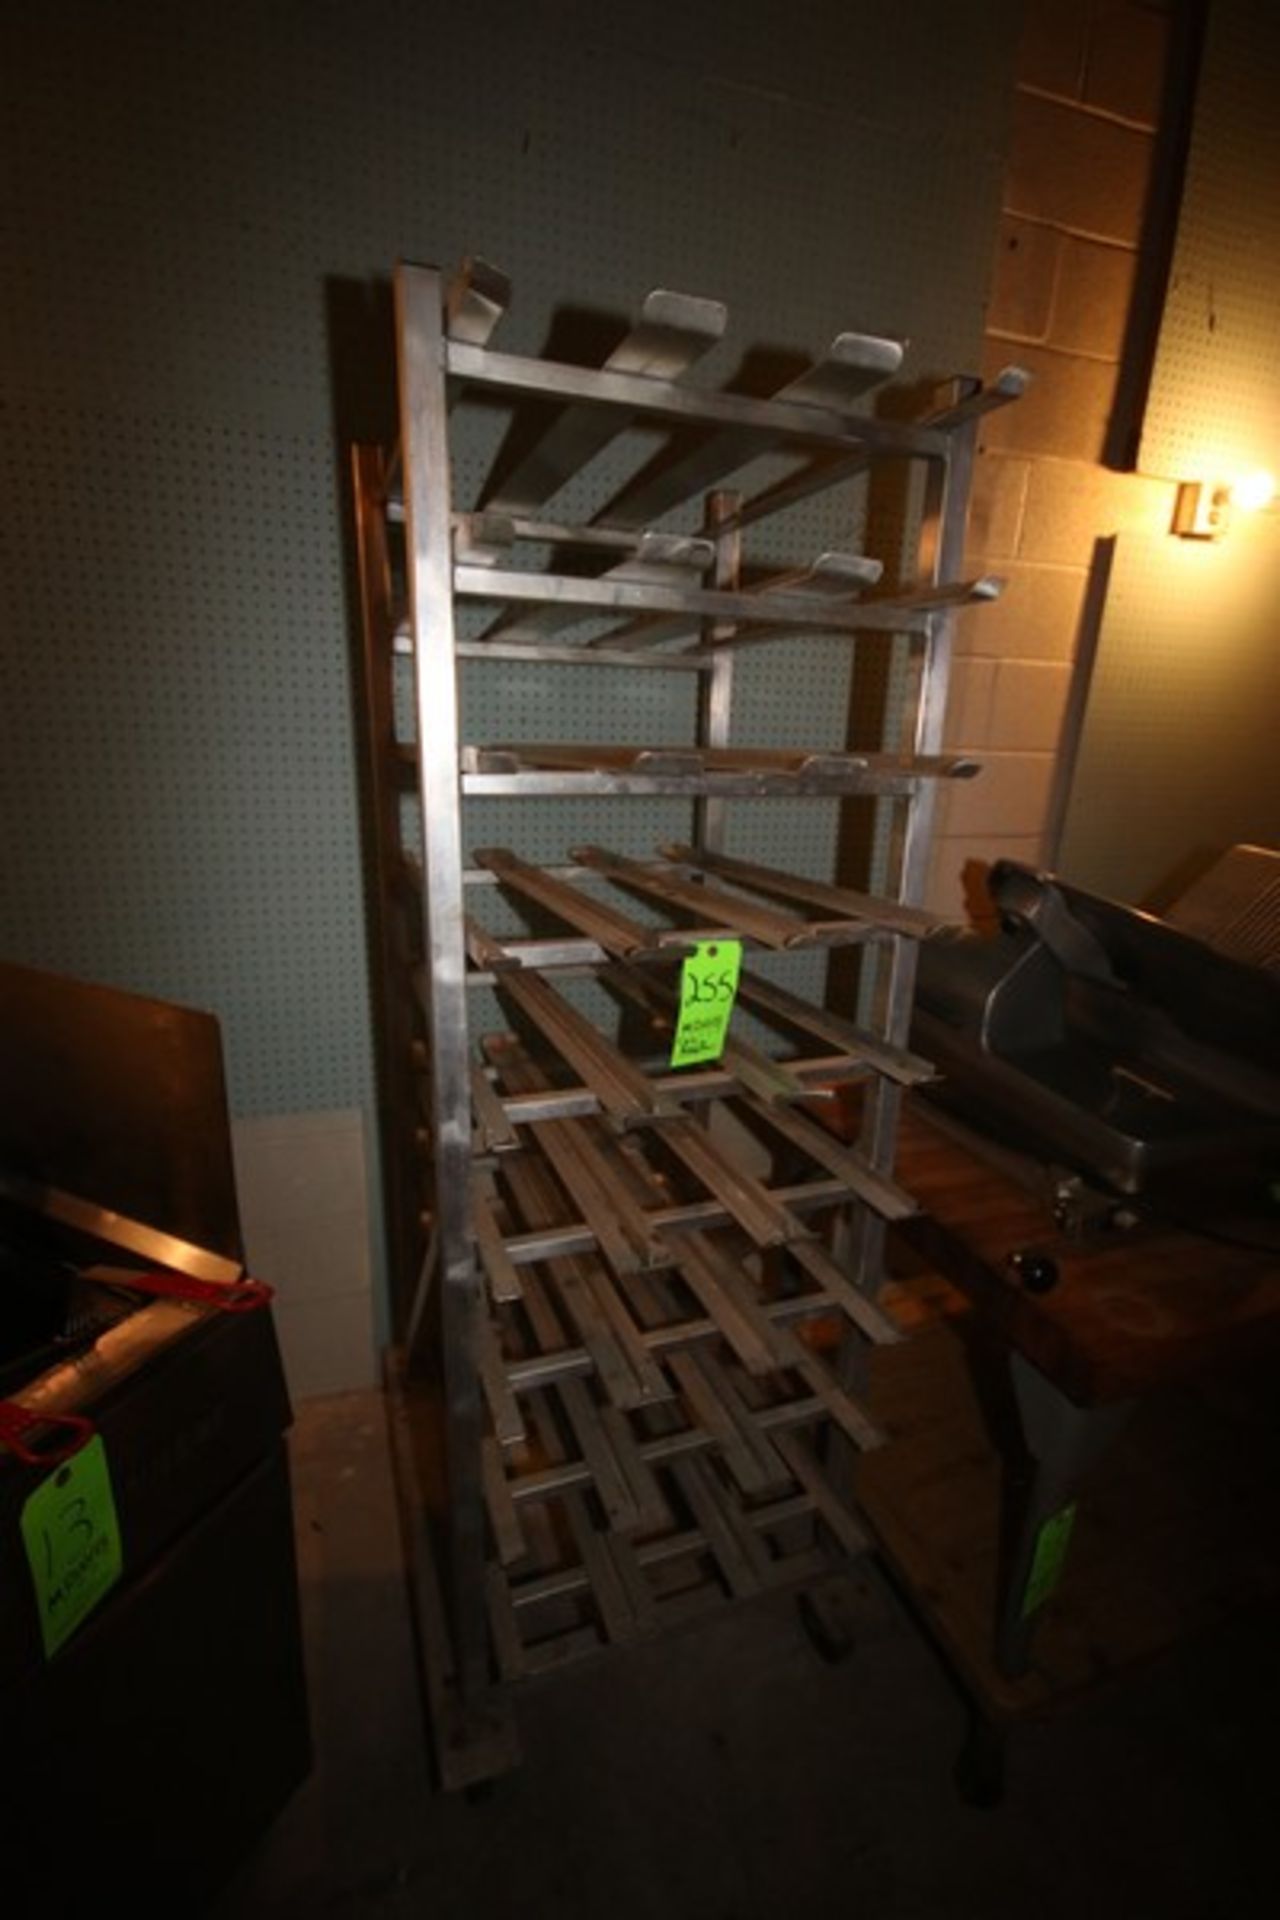 Aluminum Can Rack, with Slanted Shelving, Overall Dims.: Aprox. 34-1/2" L x 25" W x 76" H, Mounted